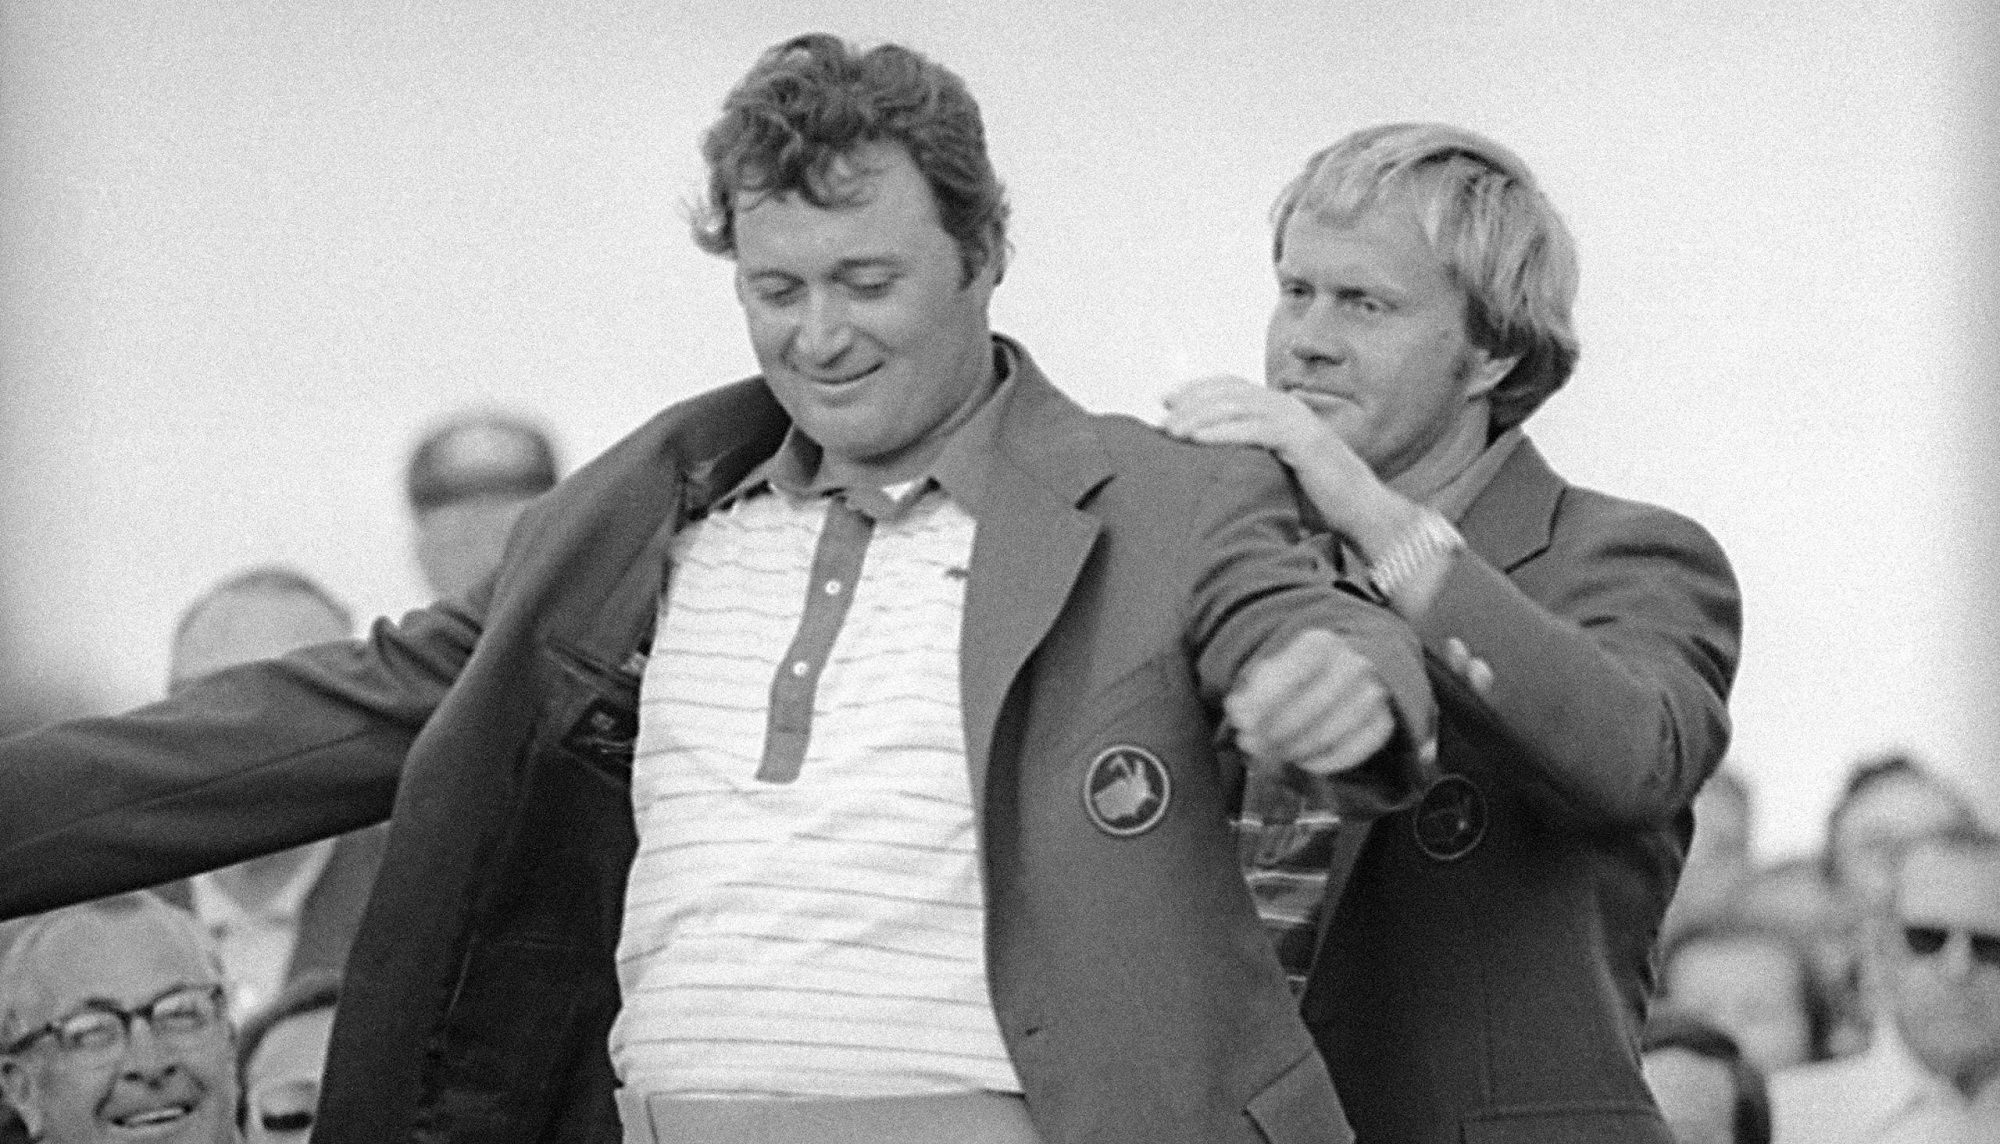 A picture of Ray Floyd winning a green jacket